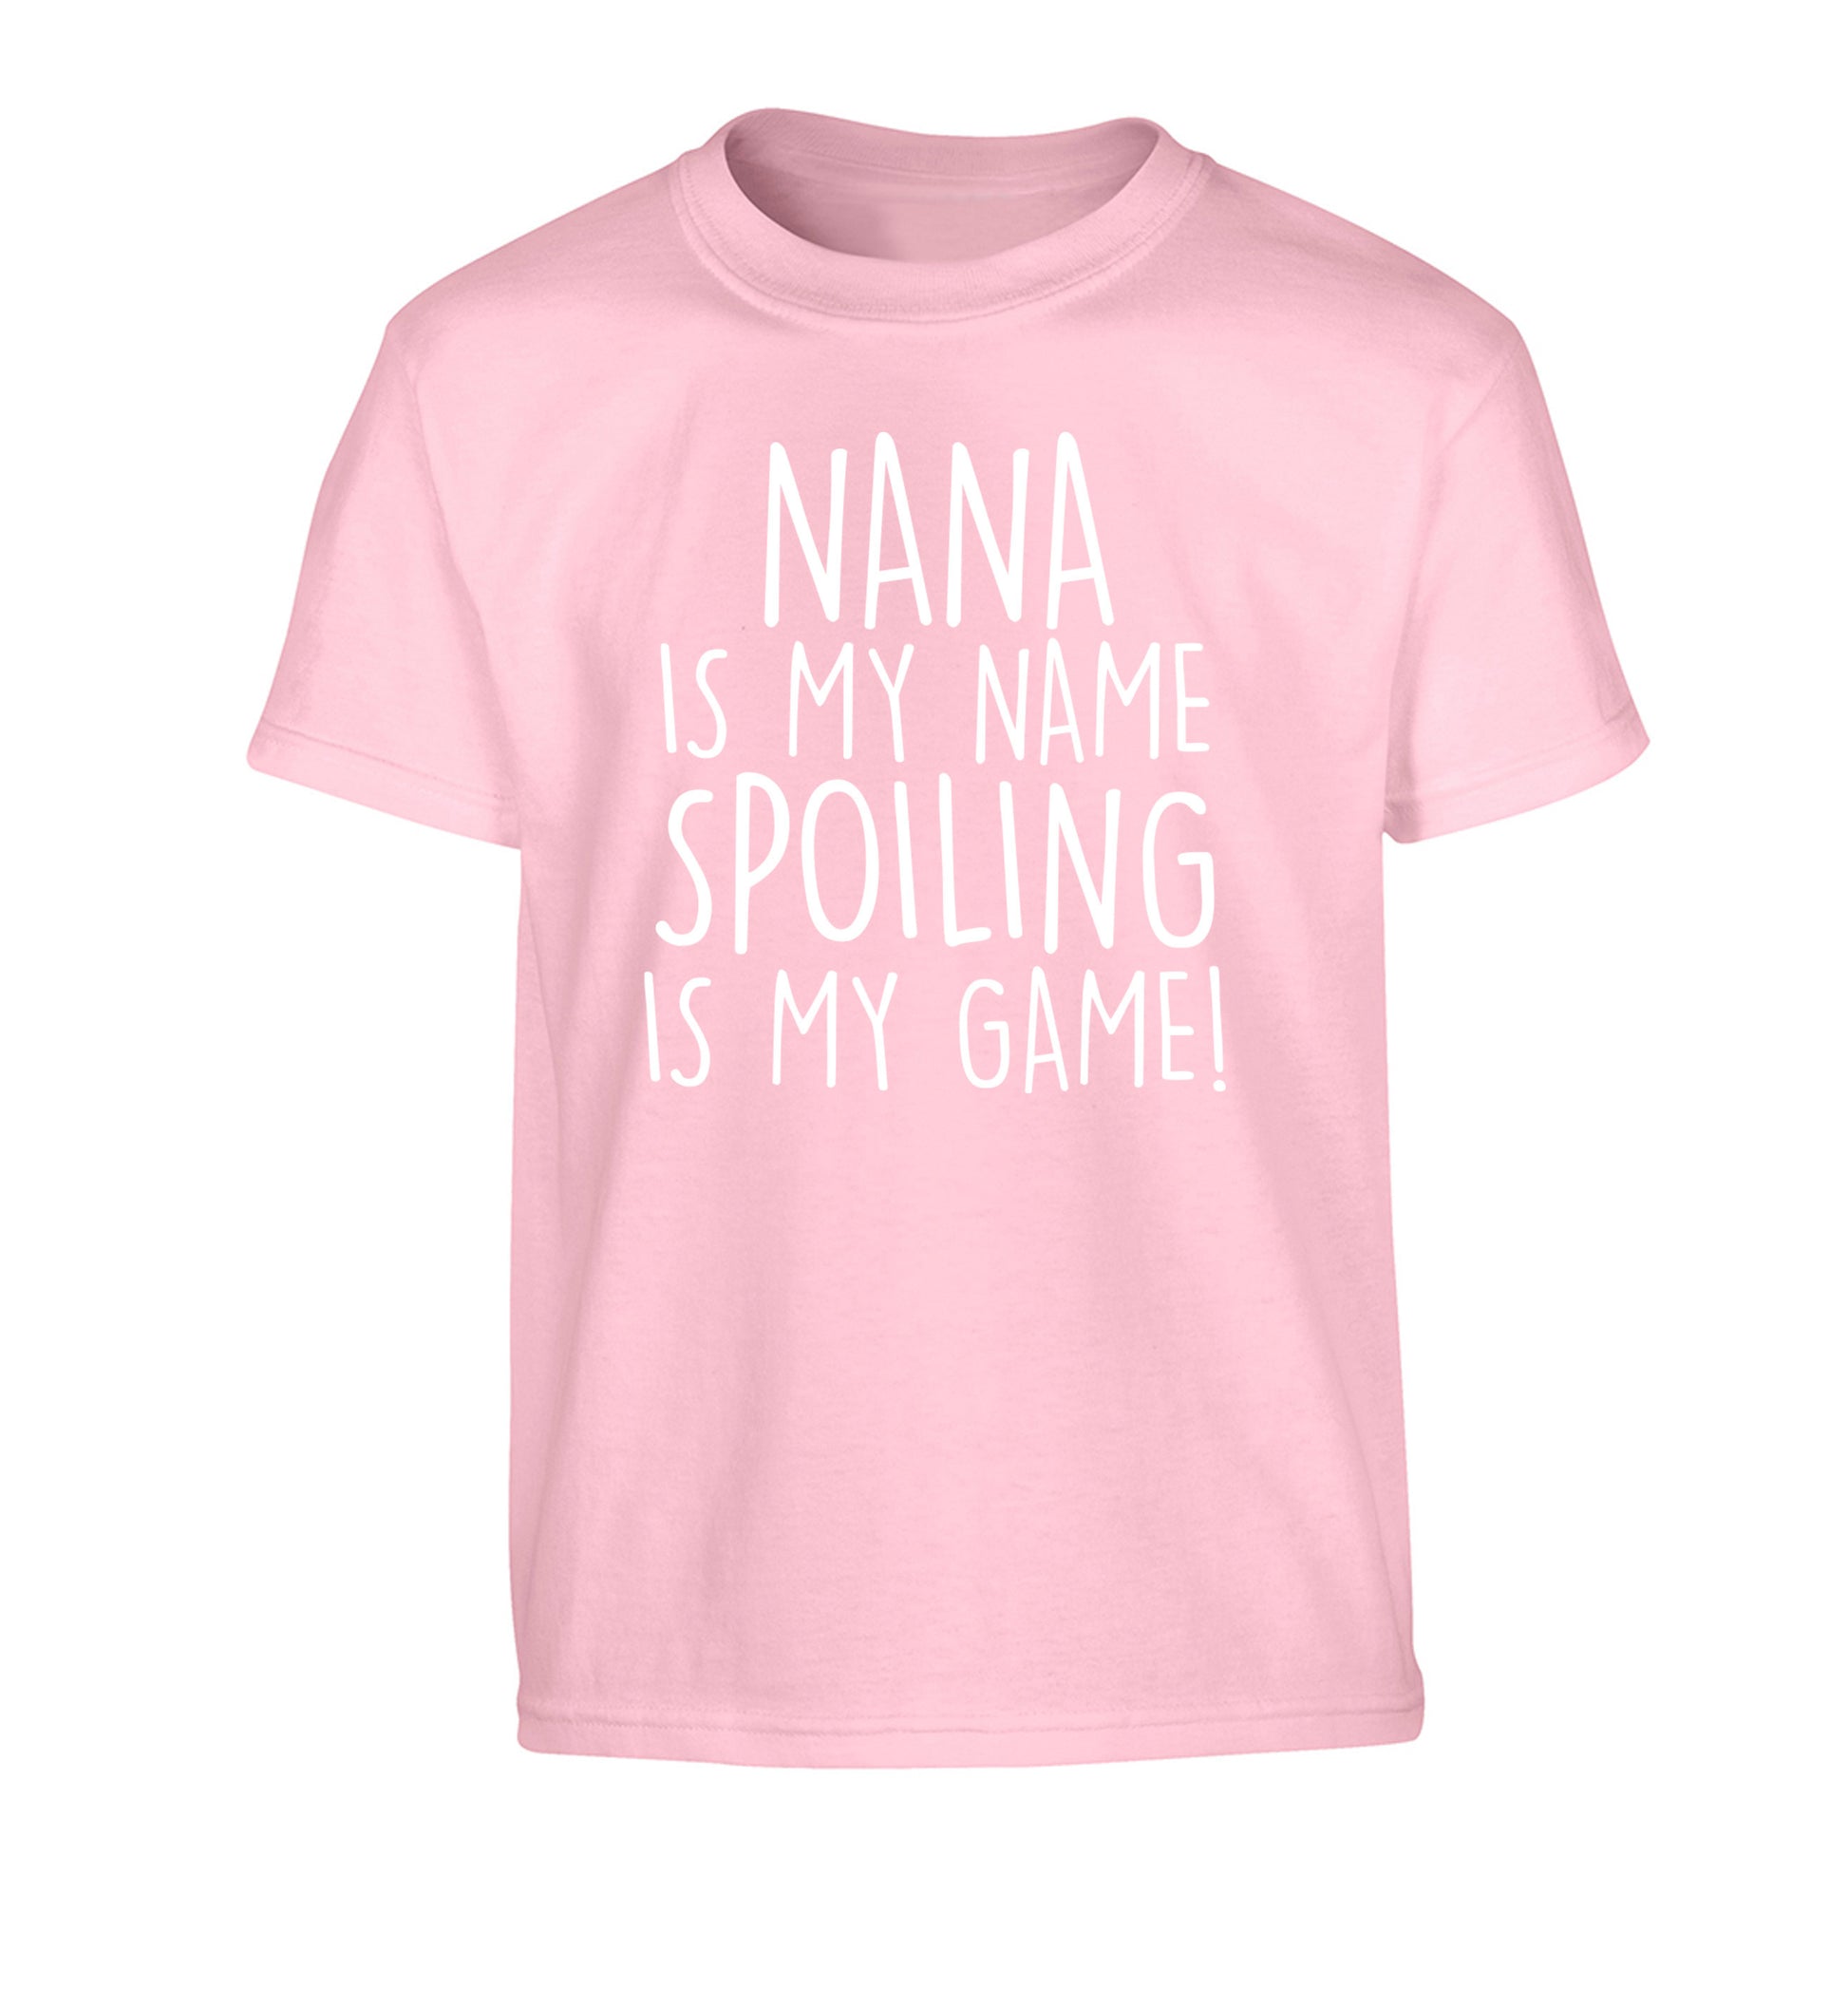 Nana is my name, spoiling is my game Children's light pink Tshirt 12-14 Years